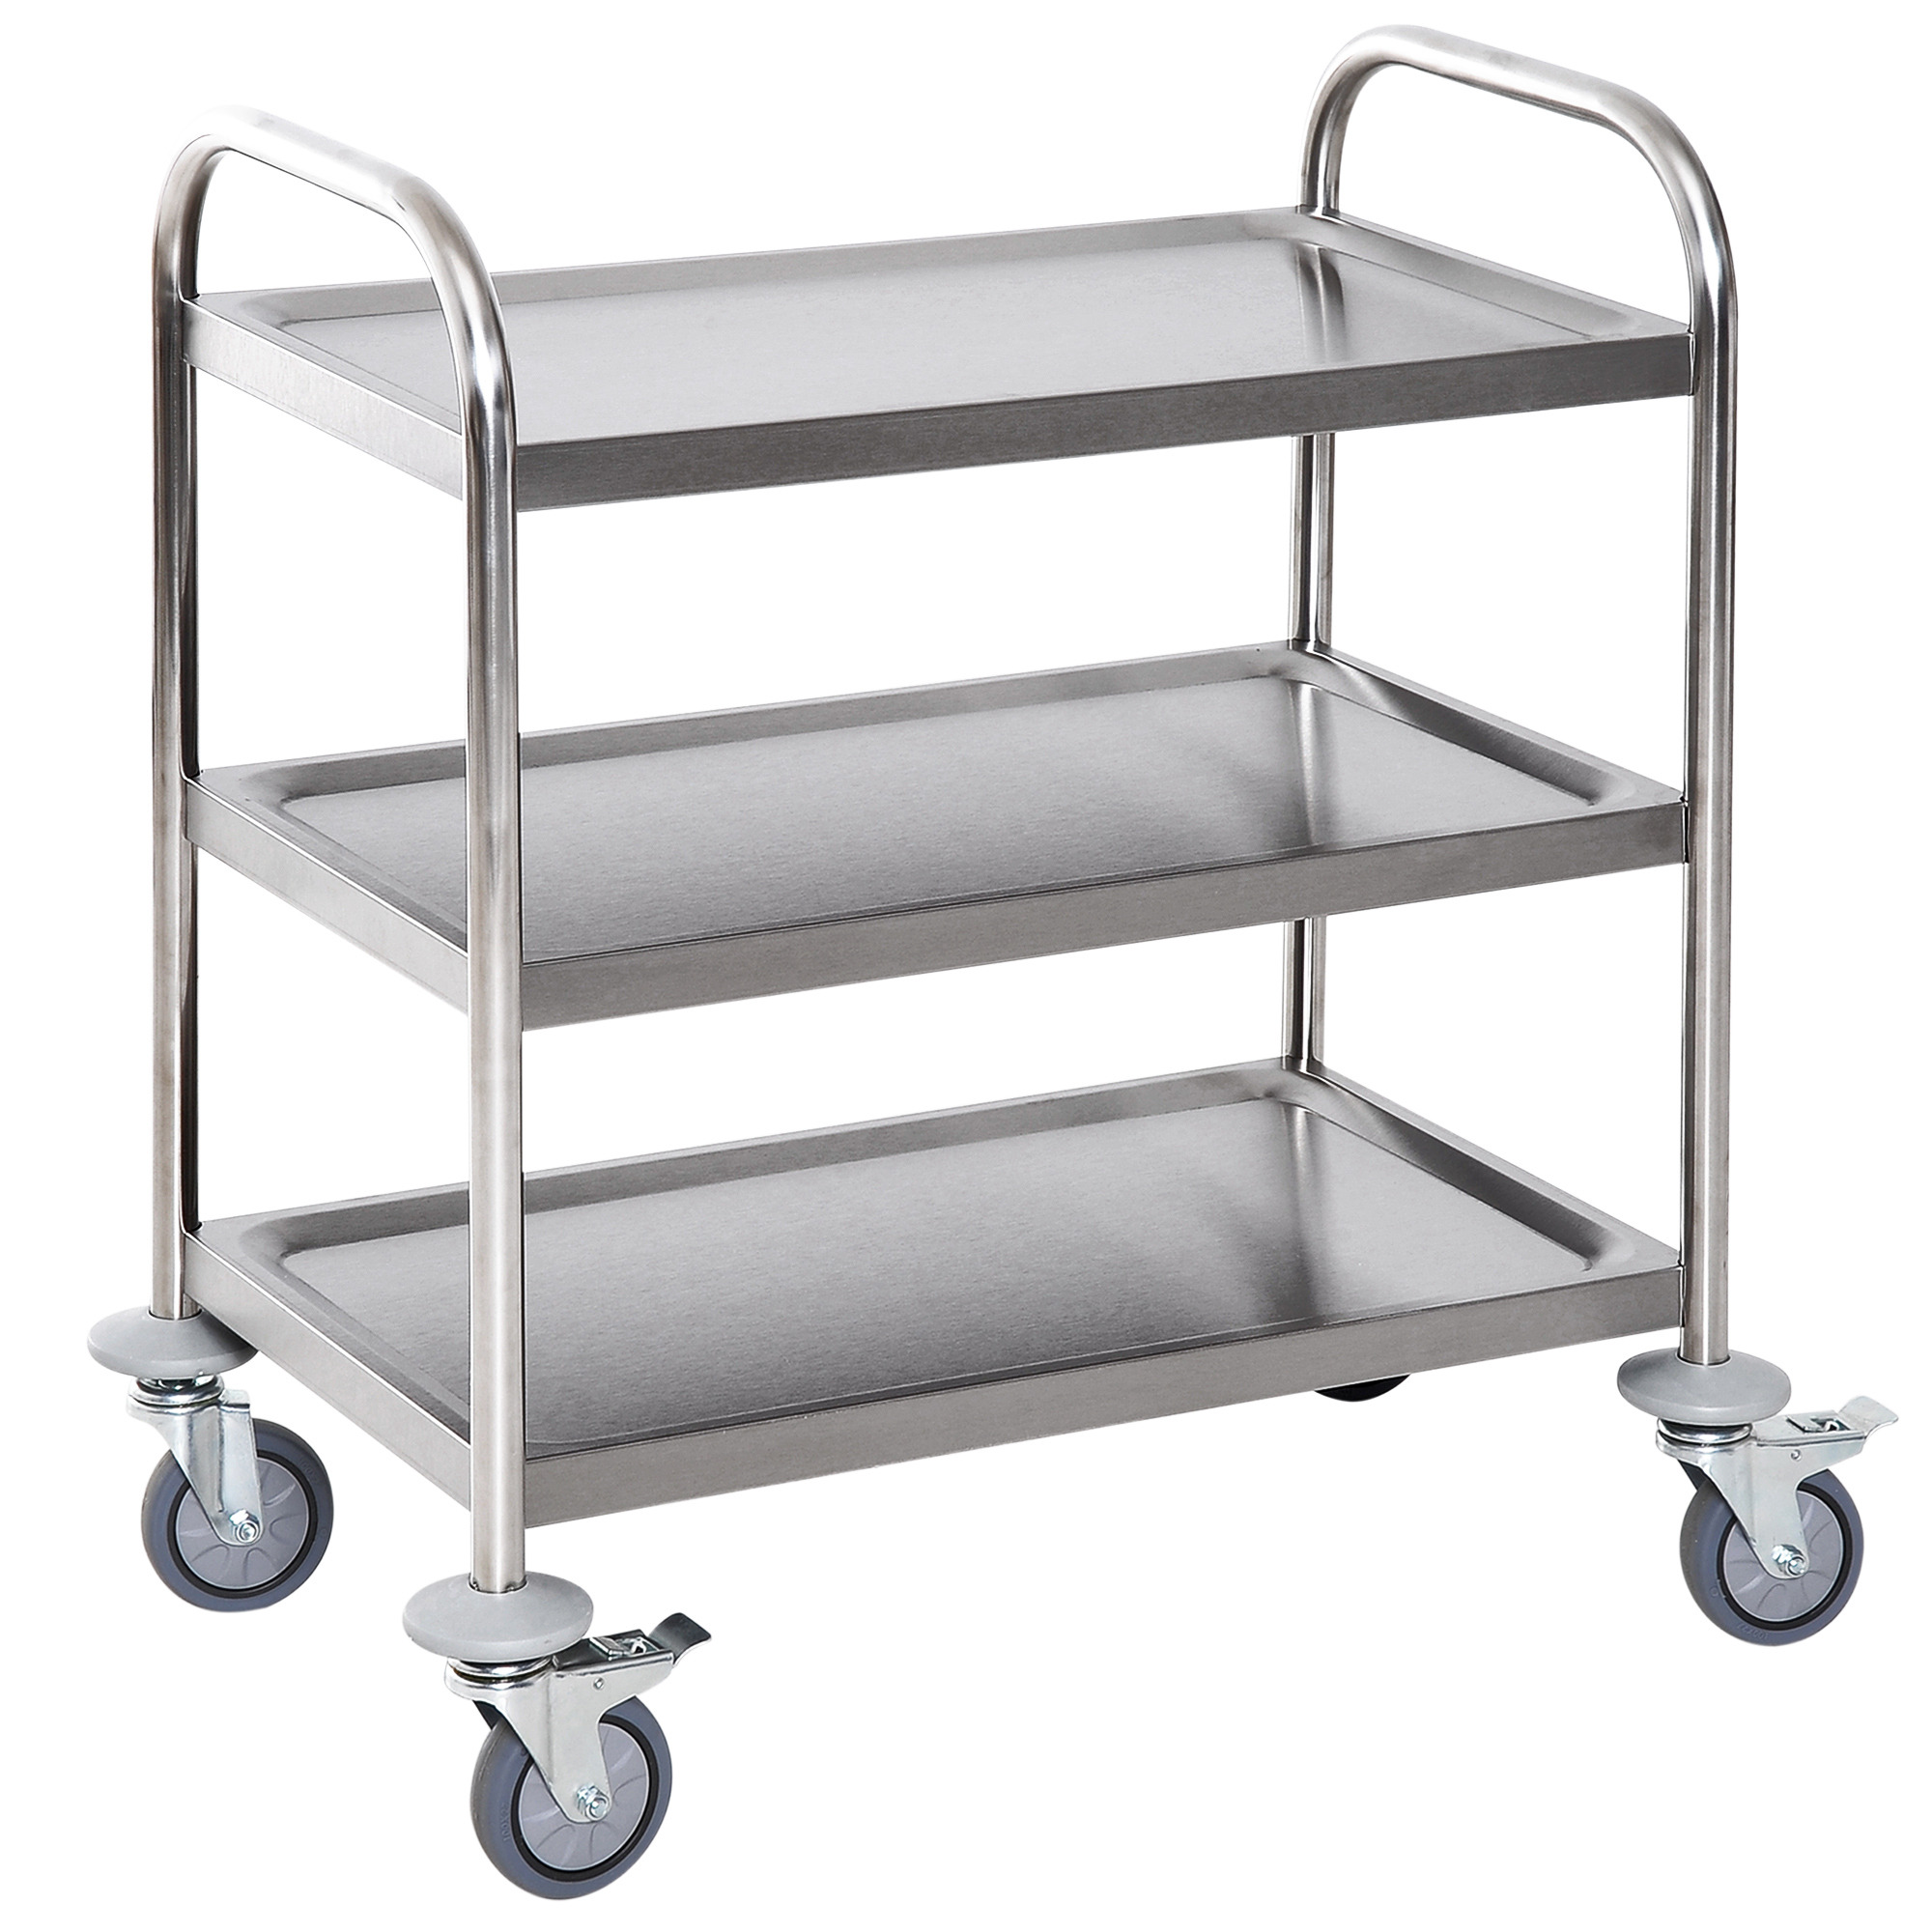 HOMCOM Stainless Steel 3 Tier Rolling Kitchen Service Cart Catering Storage Trolley Island Utility with Locking Wheels for Hotels Restaurants